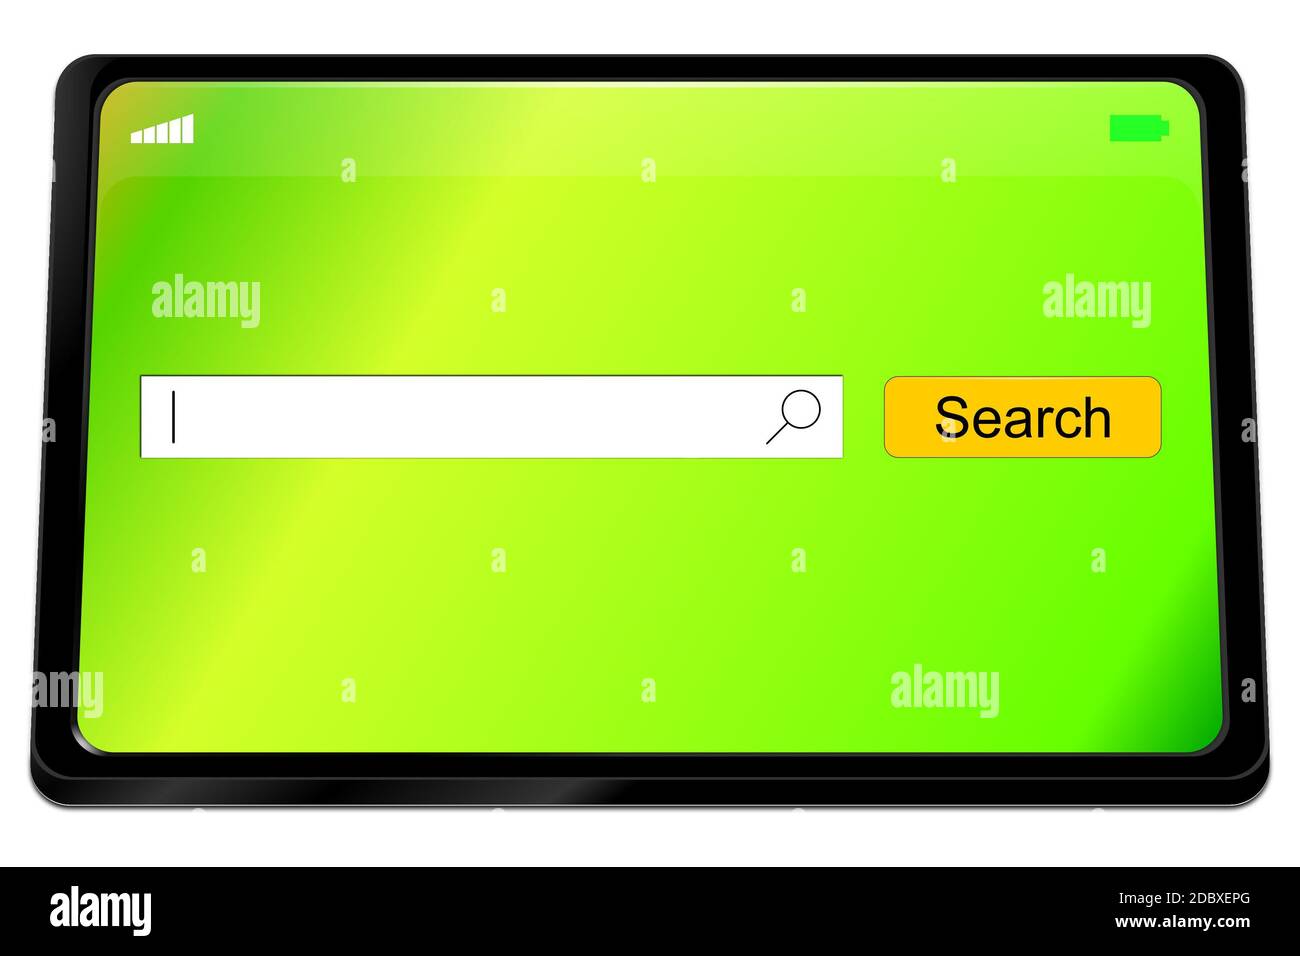 Tablet computer with internet web search engine on green display - 3D illustration Stock Photo